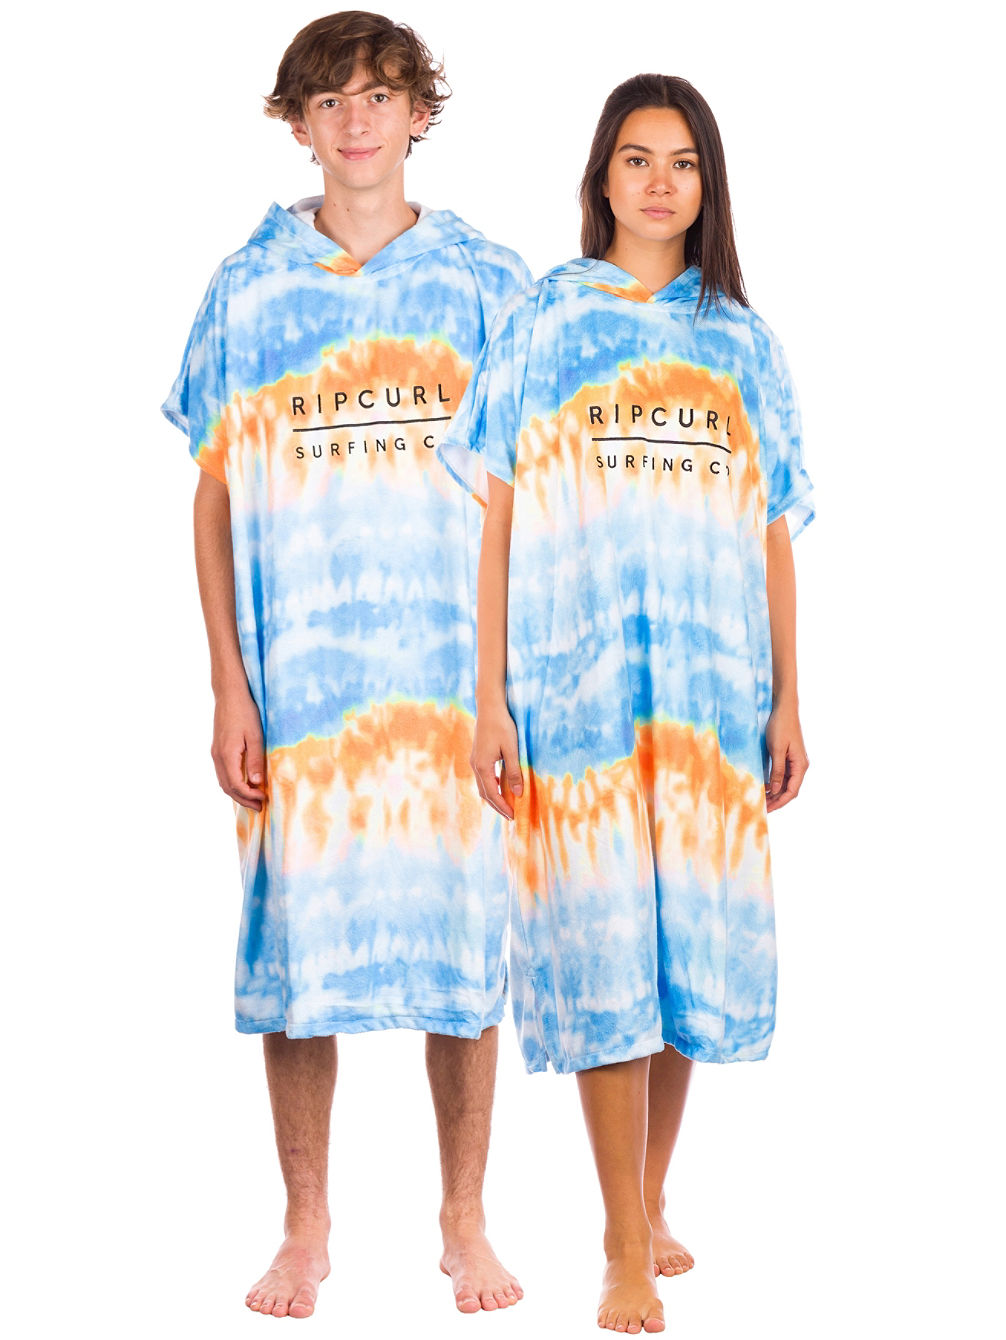 Mix Up Print Hooded Surf poncho